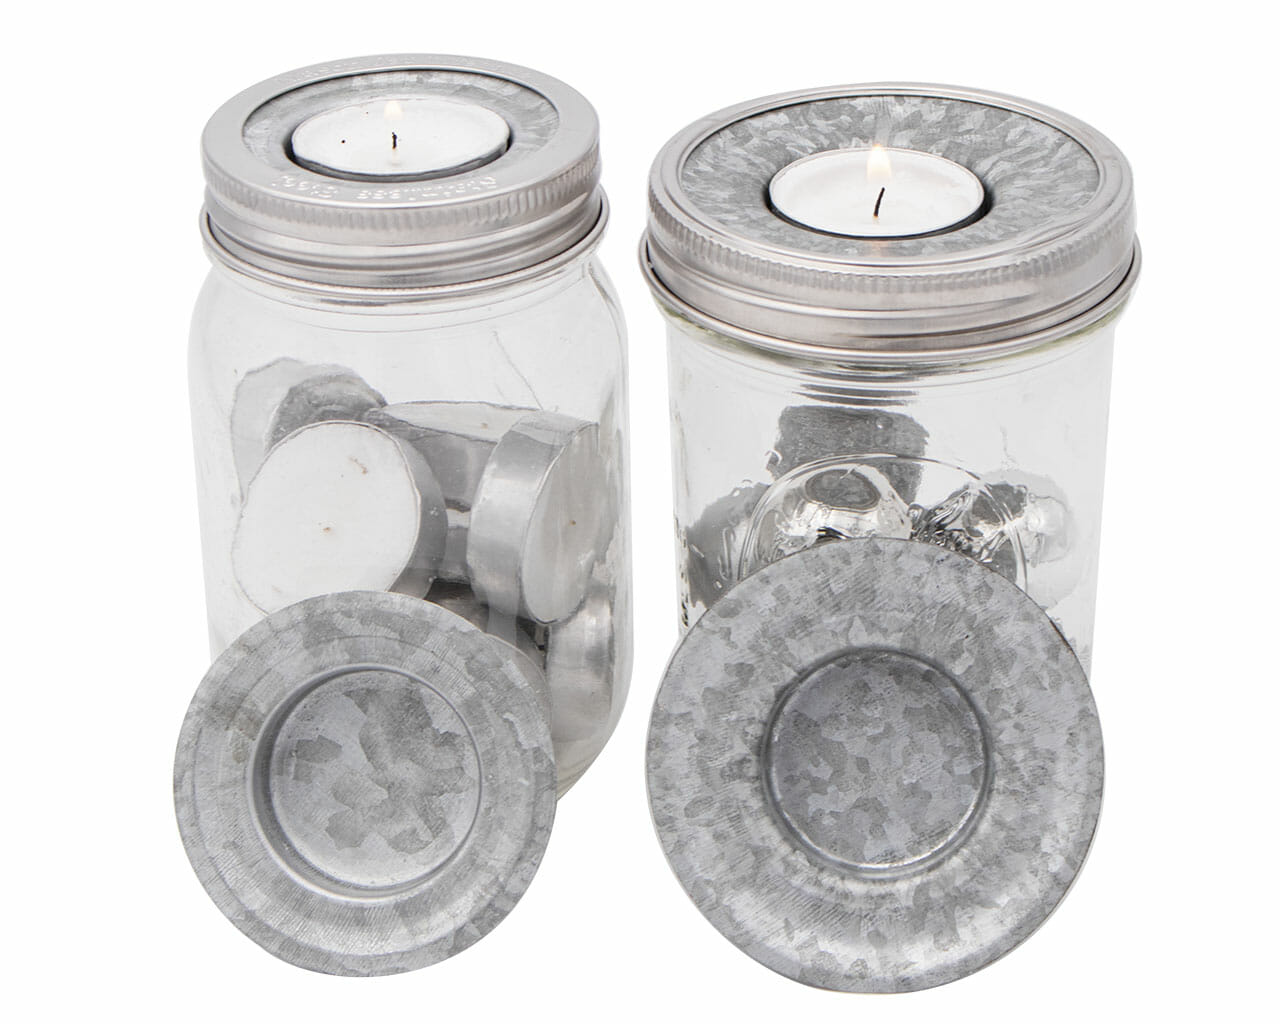 Galvanized Metal Tea Light Holder Insert for Mason Jars on Regular Mouth and Wide Mouth 16oz Pints